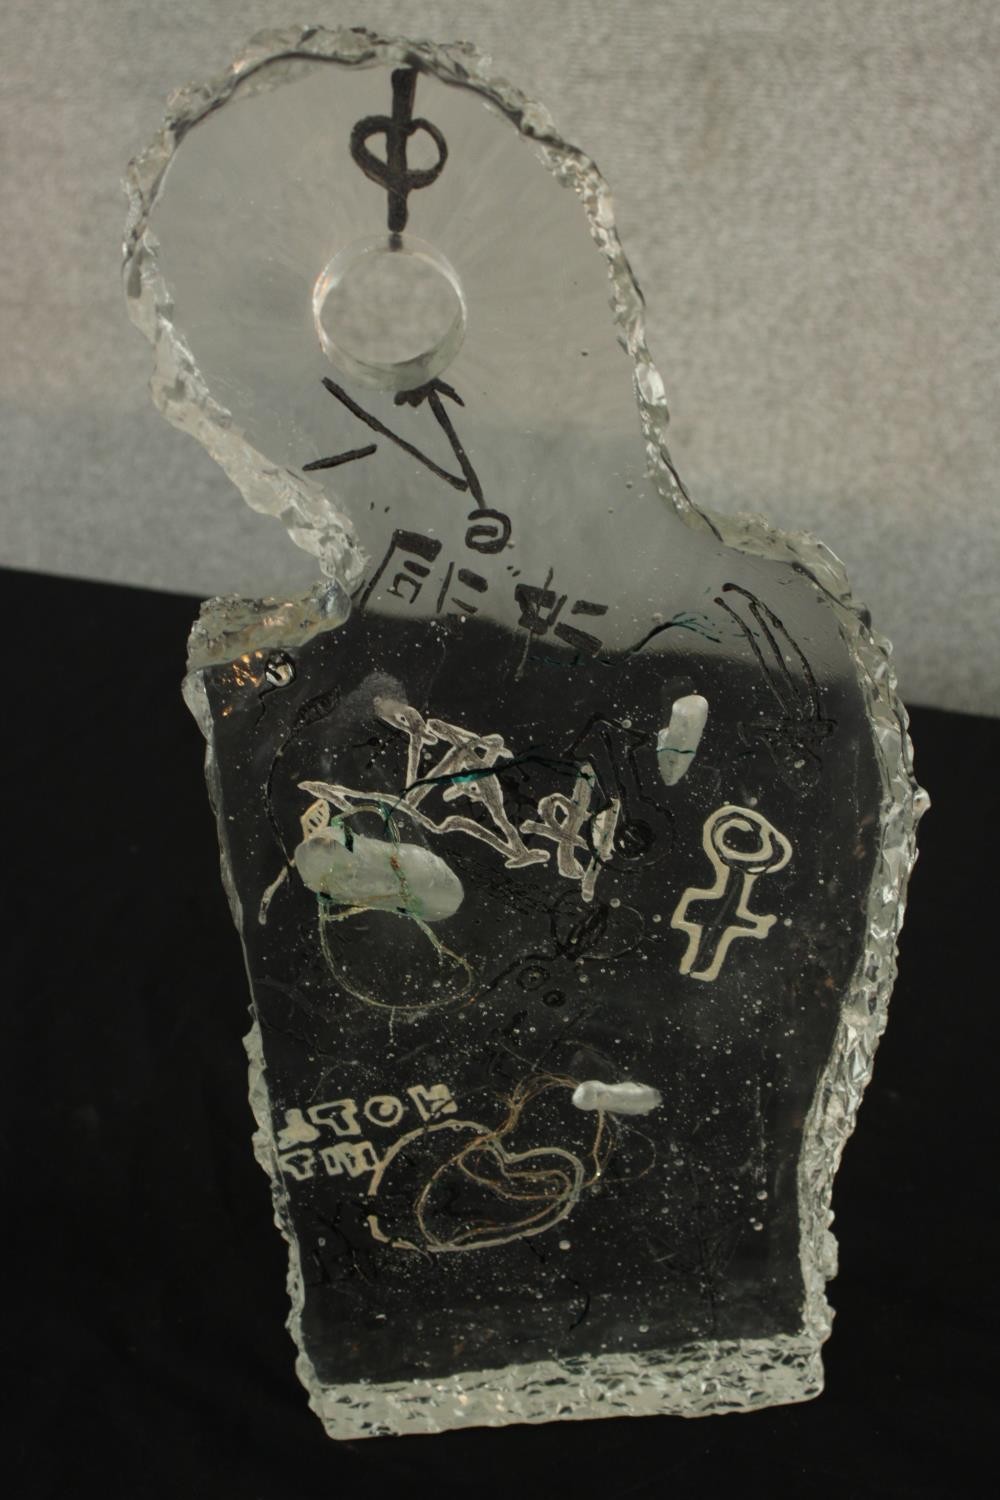 Two contemporary Asian glass sculptures, each with graffiti style decoration and suspended wire - Image 18 of 18